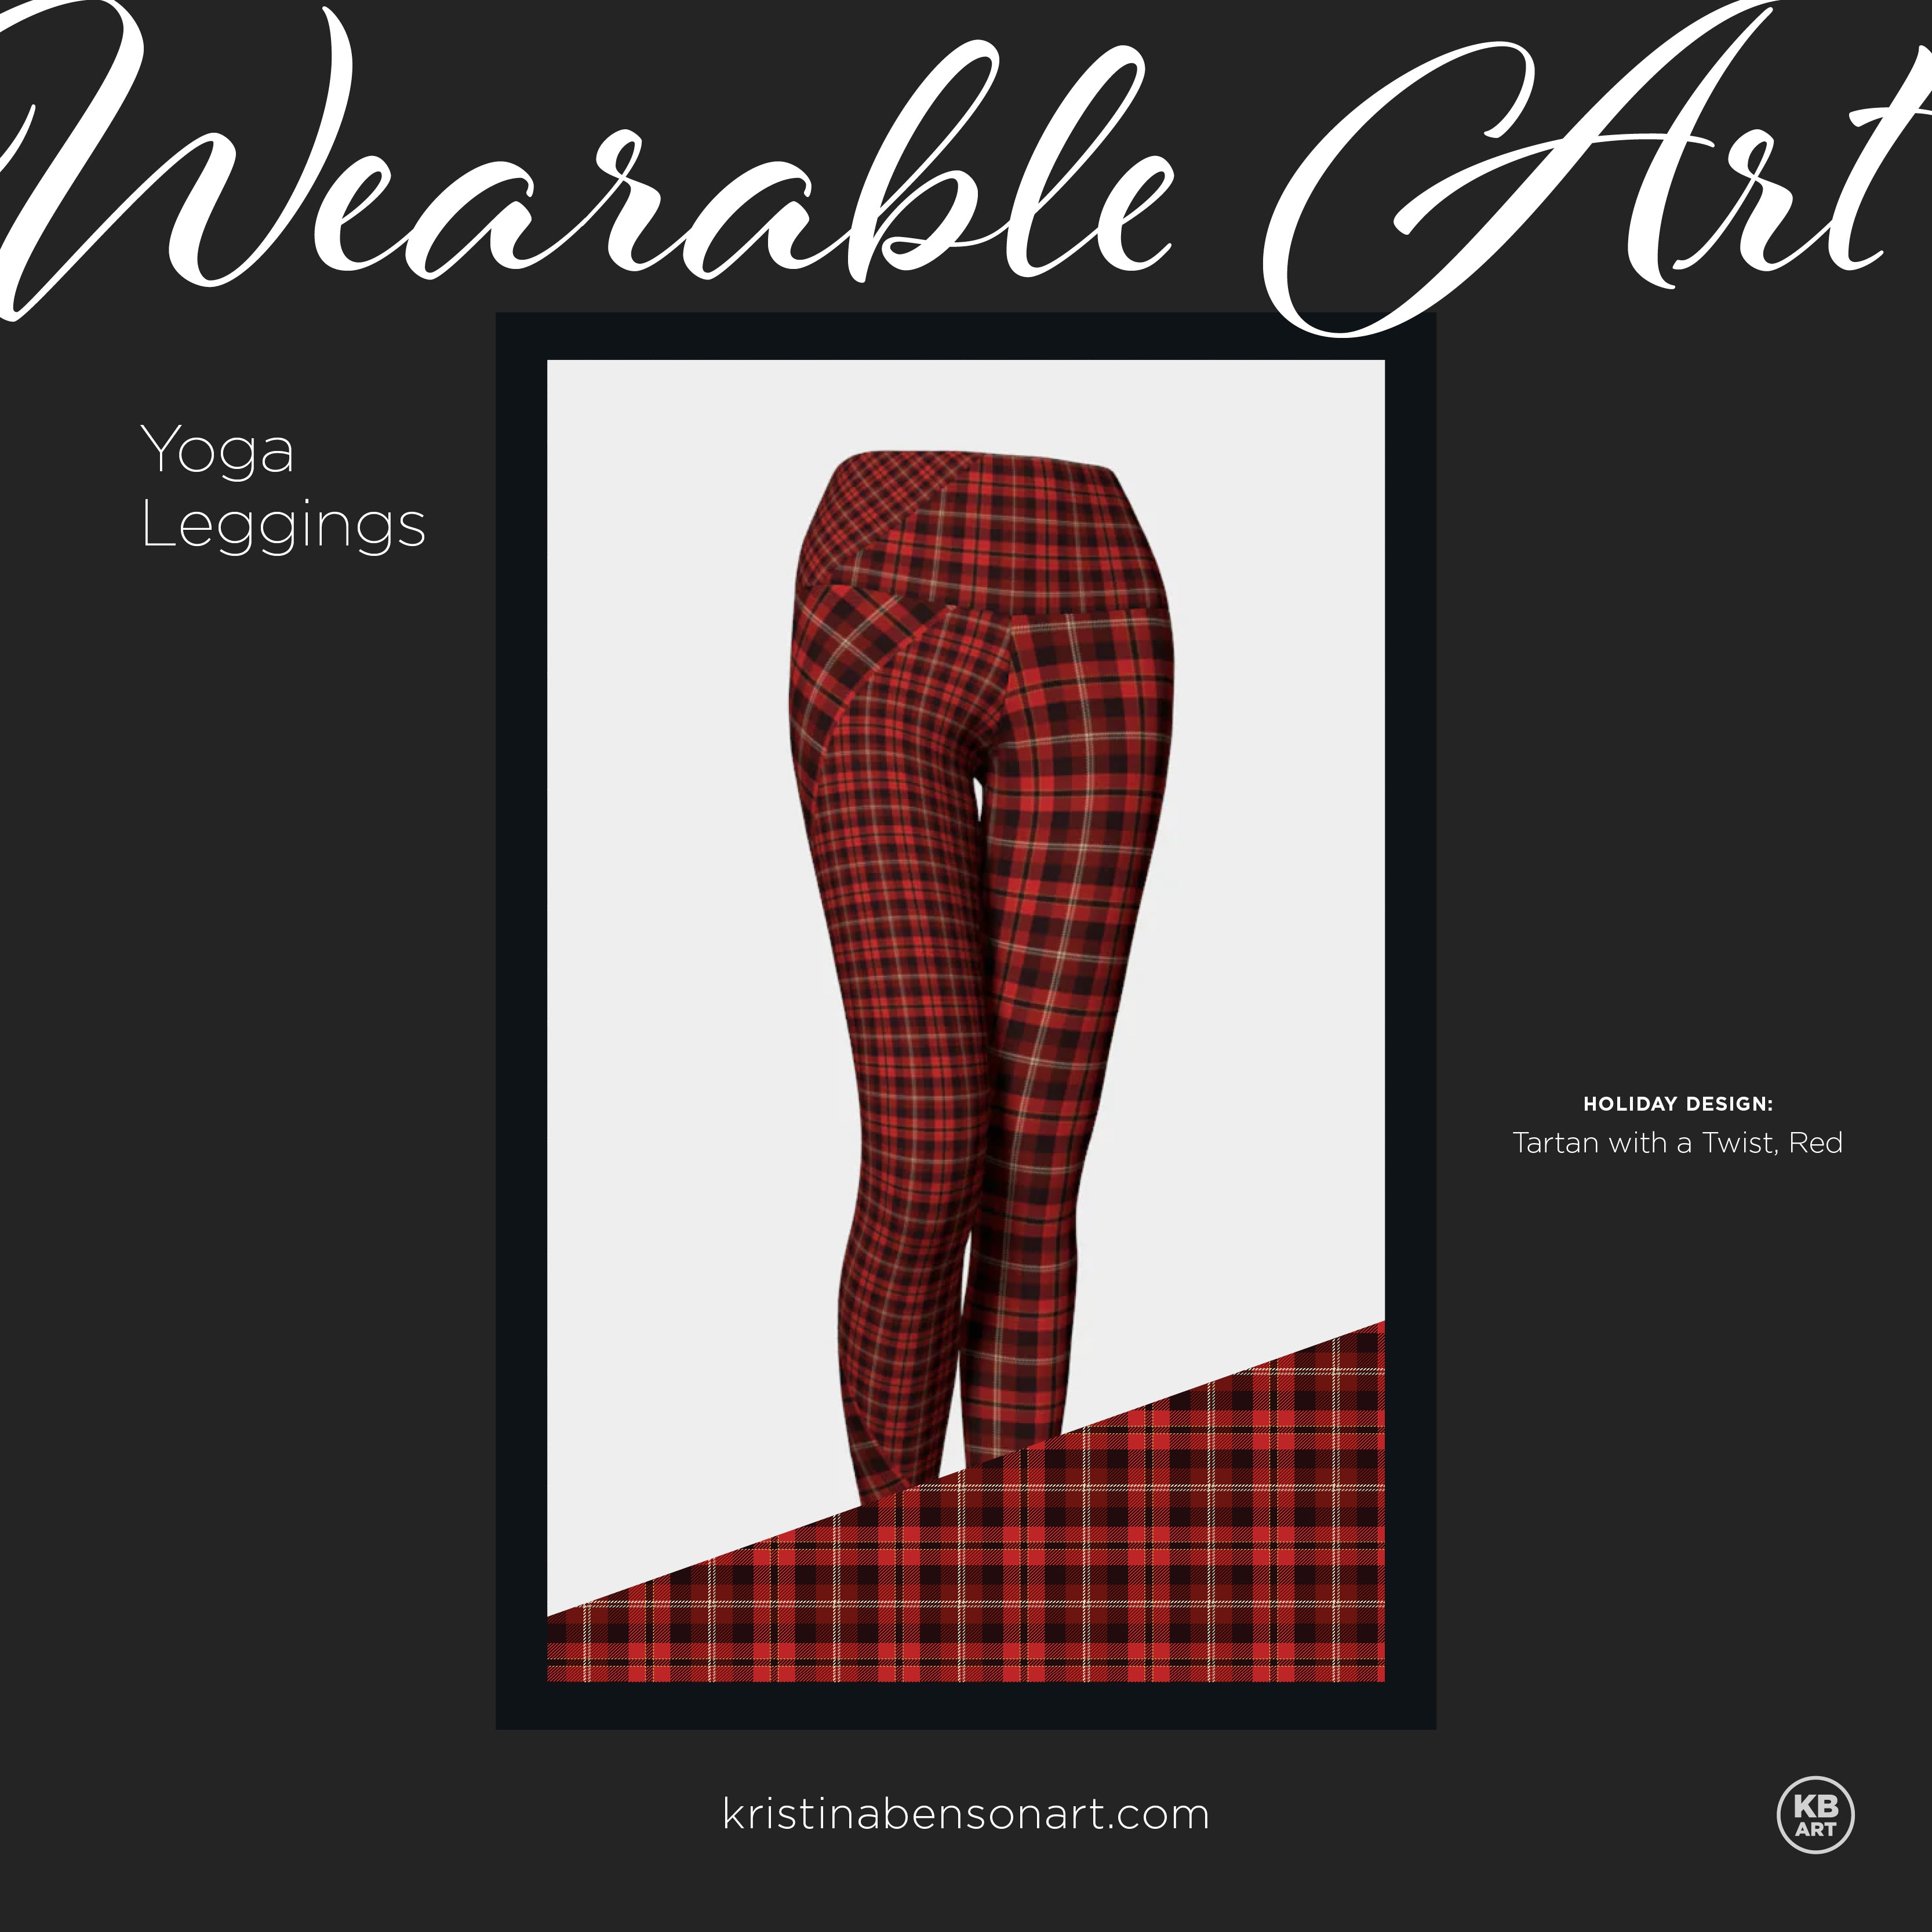 HOLIDAY: Tartan with a Twist, Classic Red – Yoga Leggings